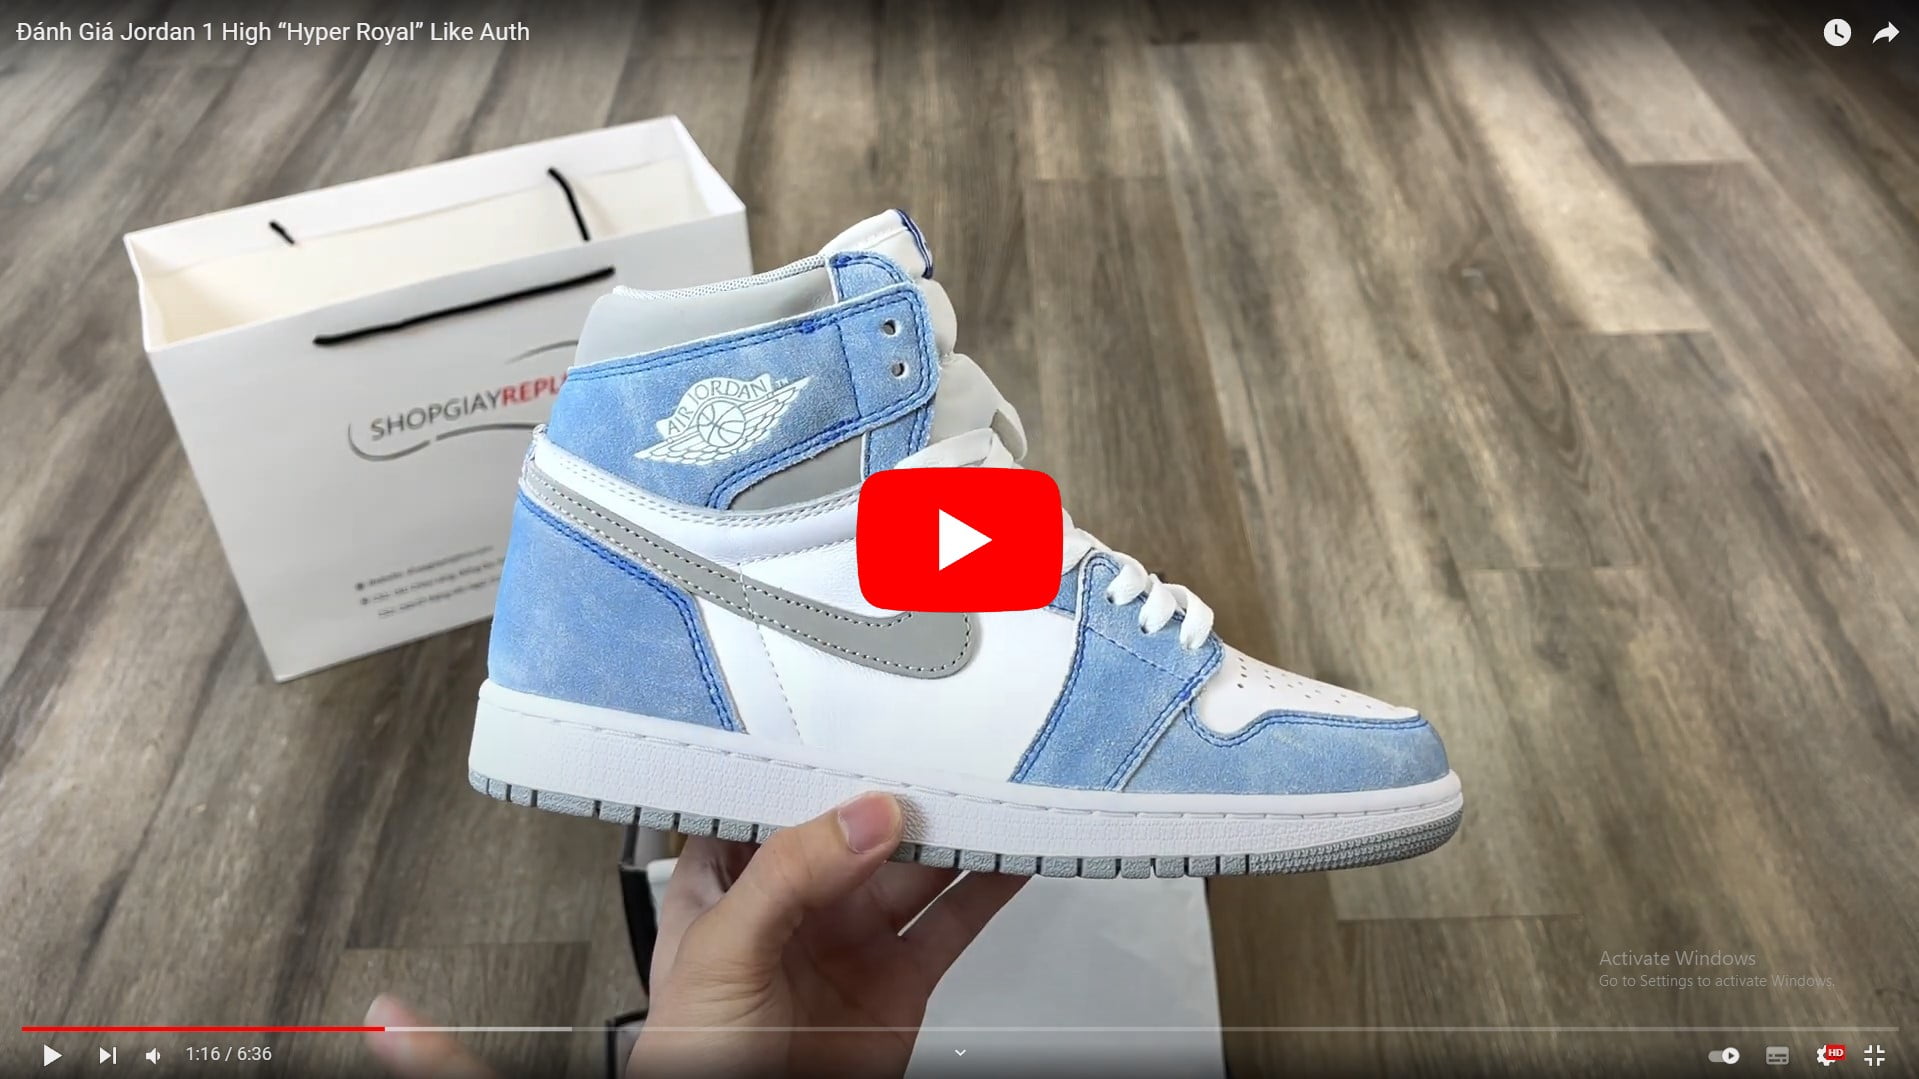 video unbox hyper royal like auth